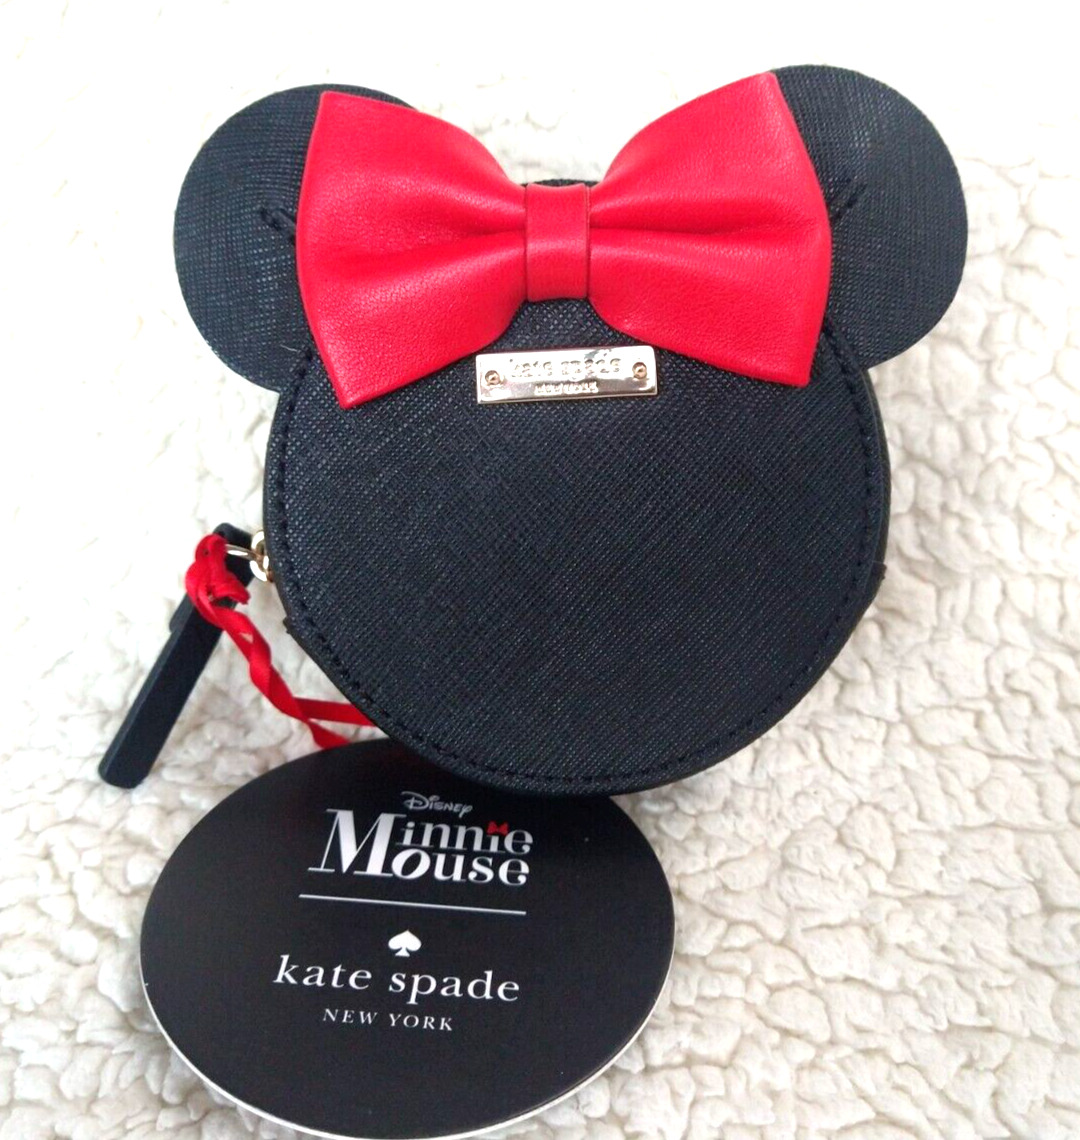 Kate Spade For Disney Minnie Mouse coin purse NWOT